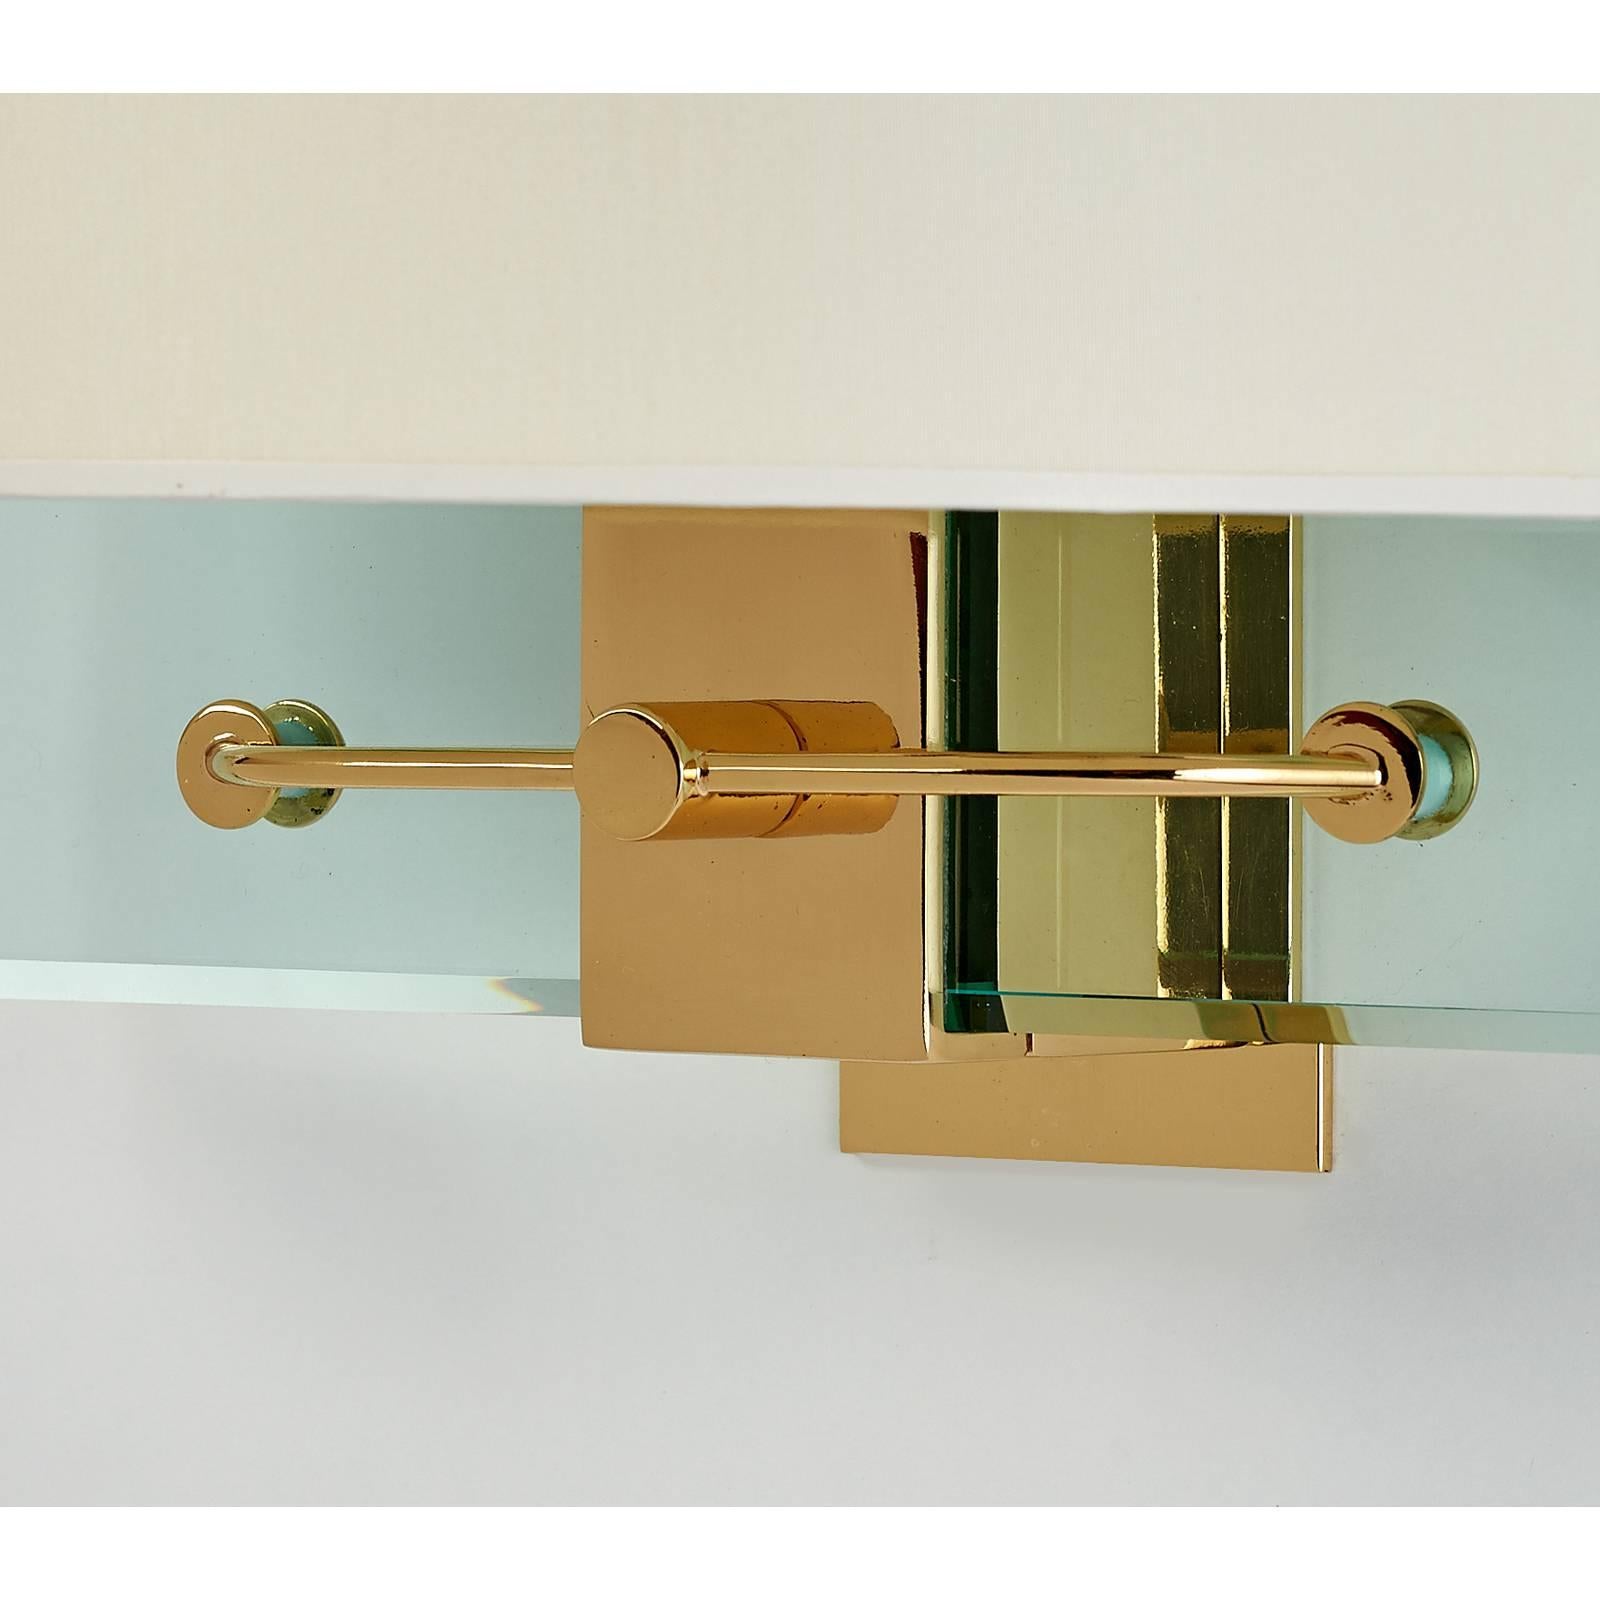 Nathalie Grenon for Fontana Arte.
A stunning pair of Fontana Arte glass and polished brass sconces, designed by Nathalie Grenon for Bulgari in 1990.
Sold and priced as a pair
Dimensions: 13.5 W x 15 H x 7 proj.
Rewired for use in the USA with four